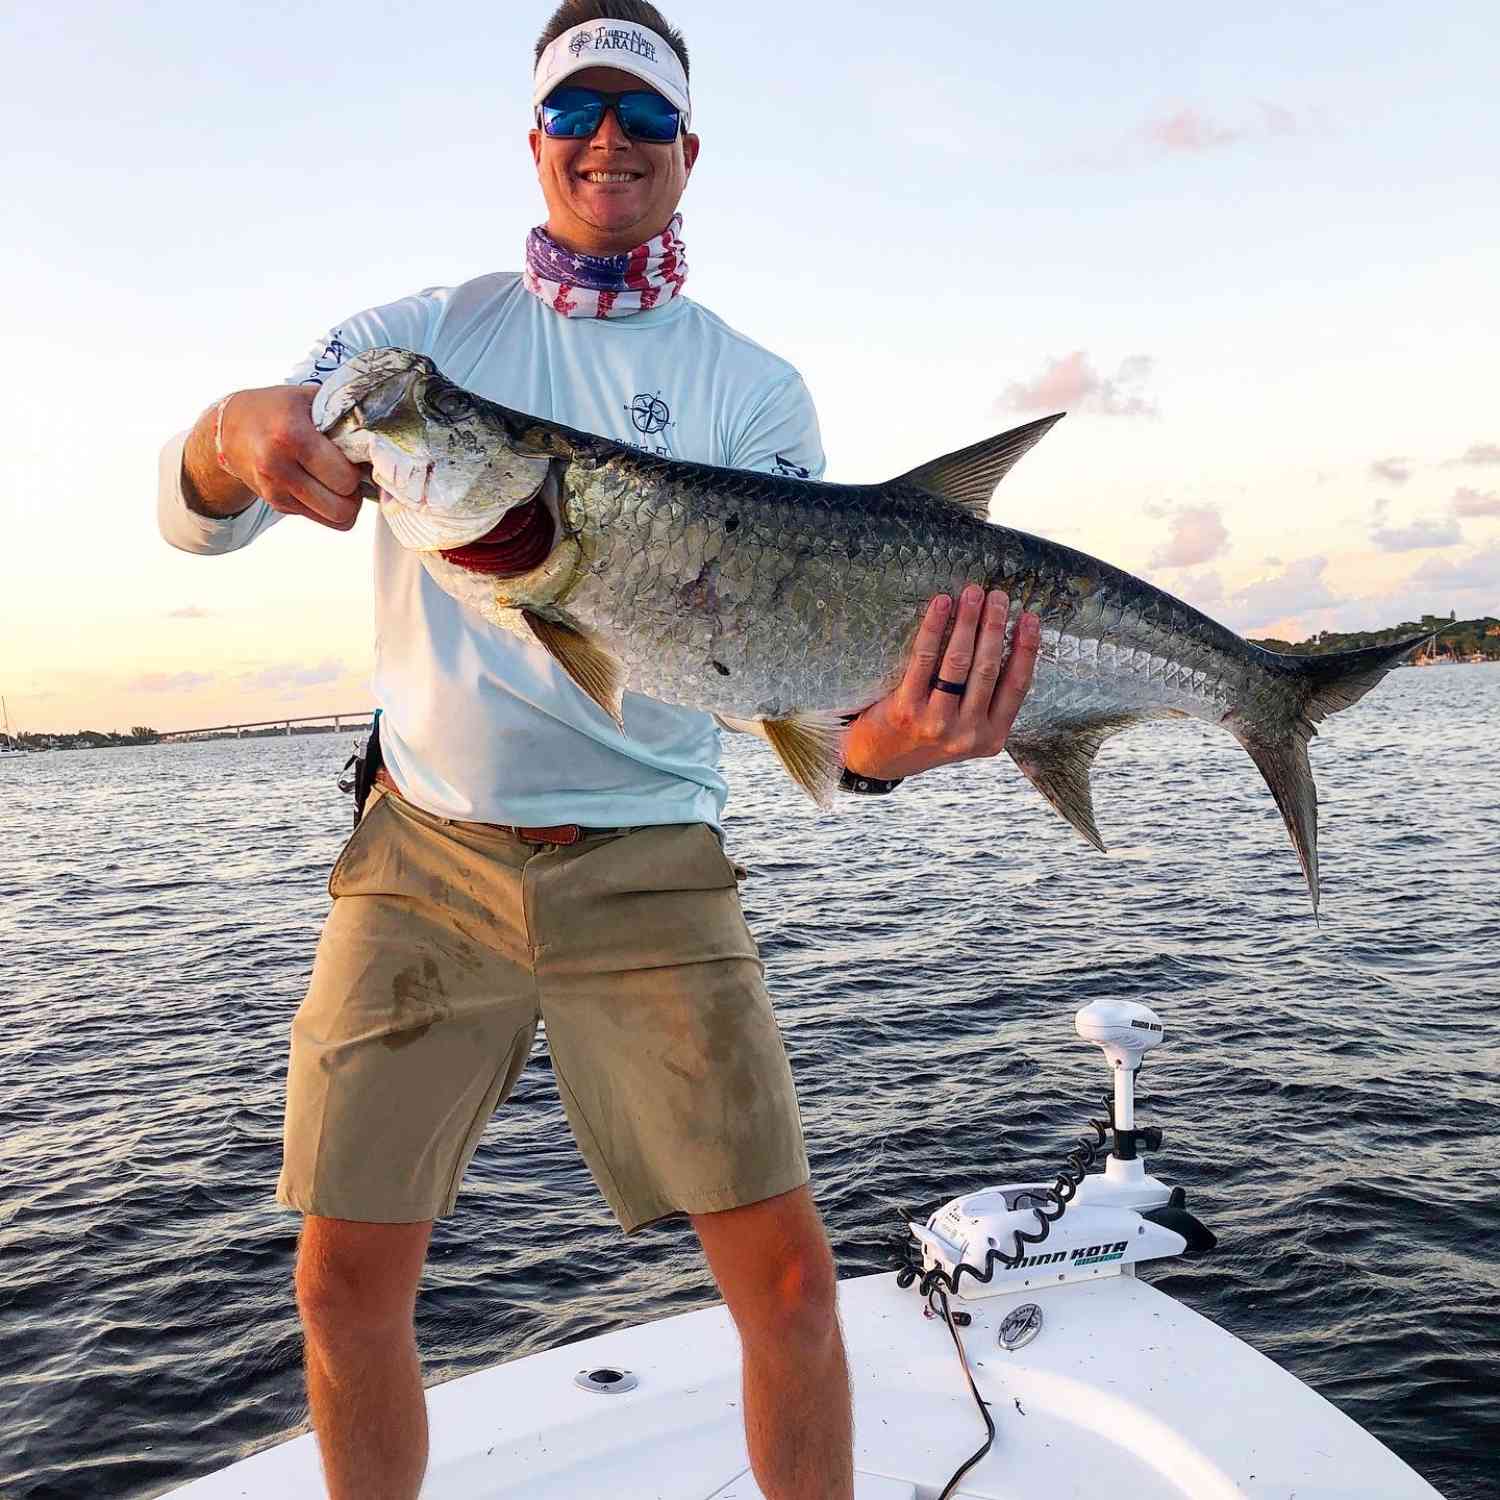 Finally got my first tarpon!! Caught on live finger mullet while pitching up into docks on the...